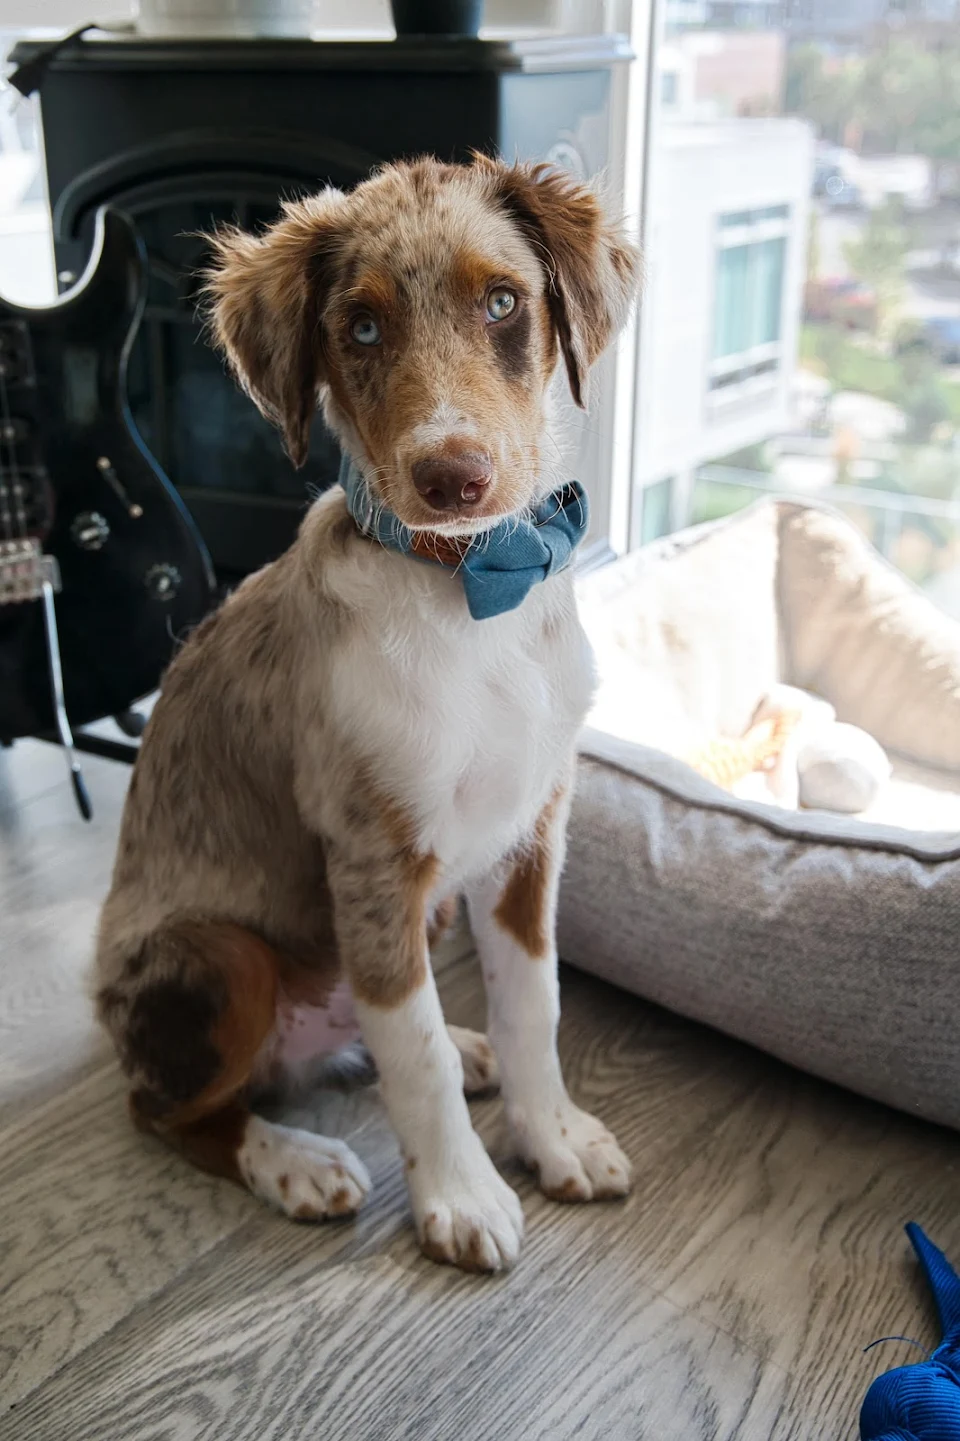 This is Tucker, My 4-month-old AussieDoodle. Ready for his first wedding!